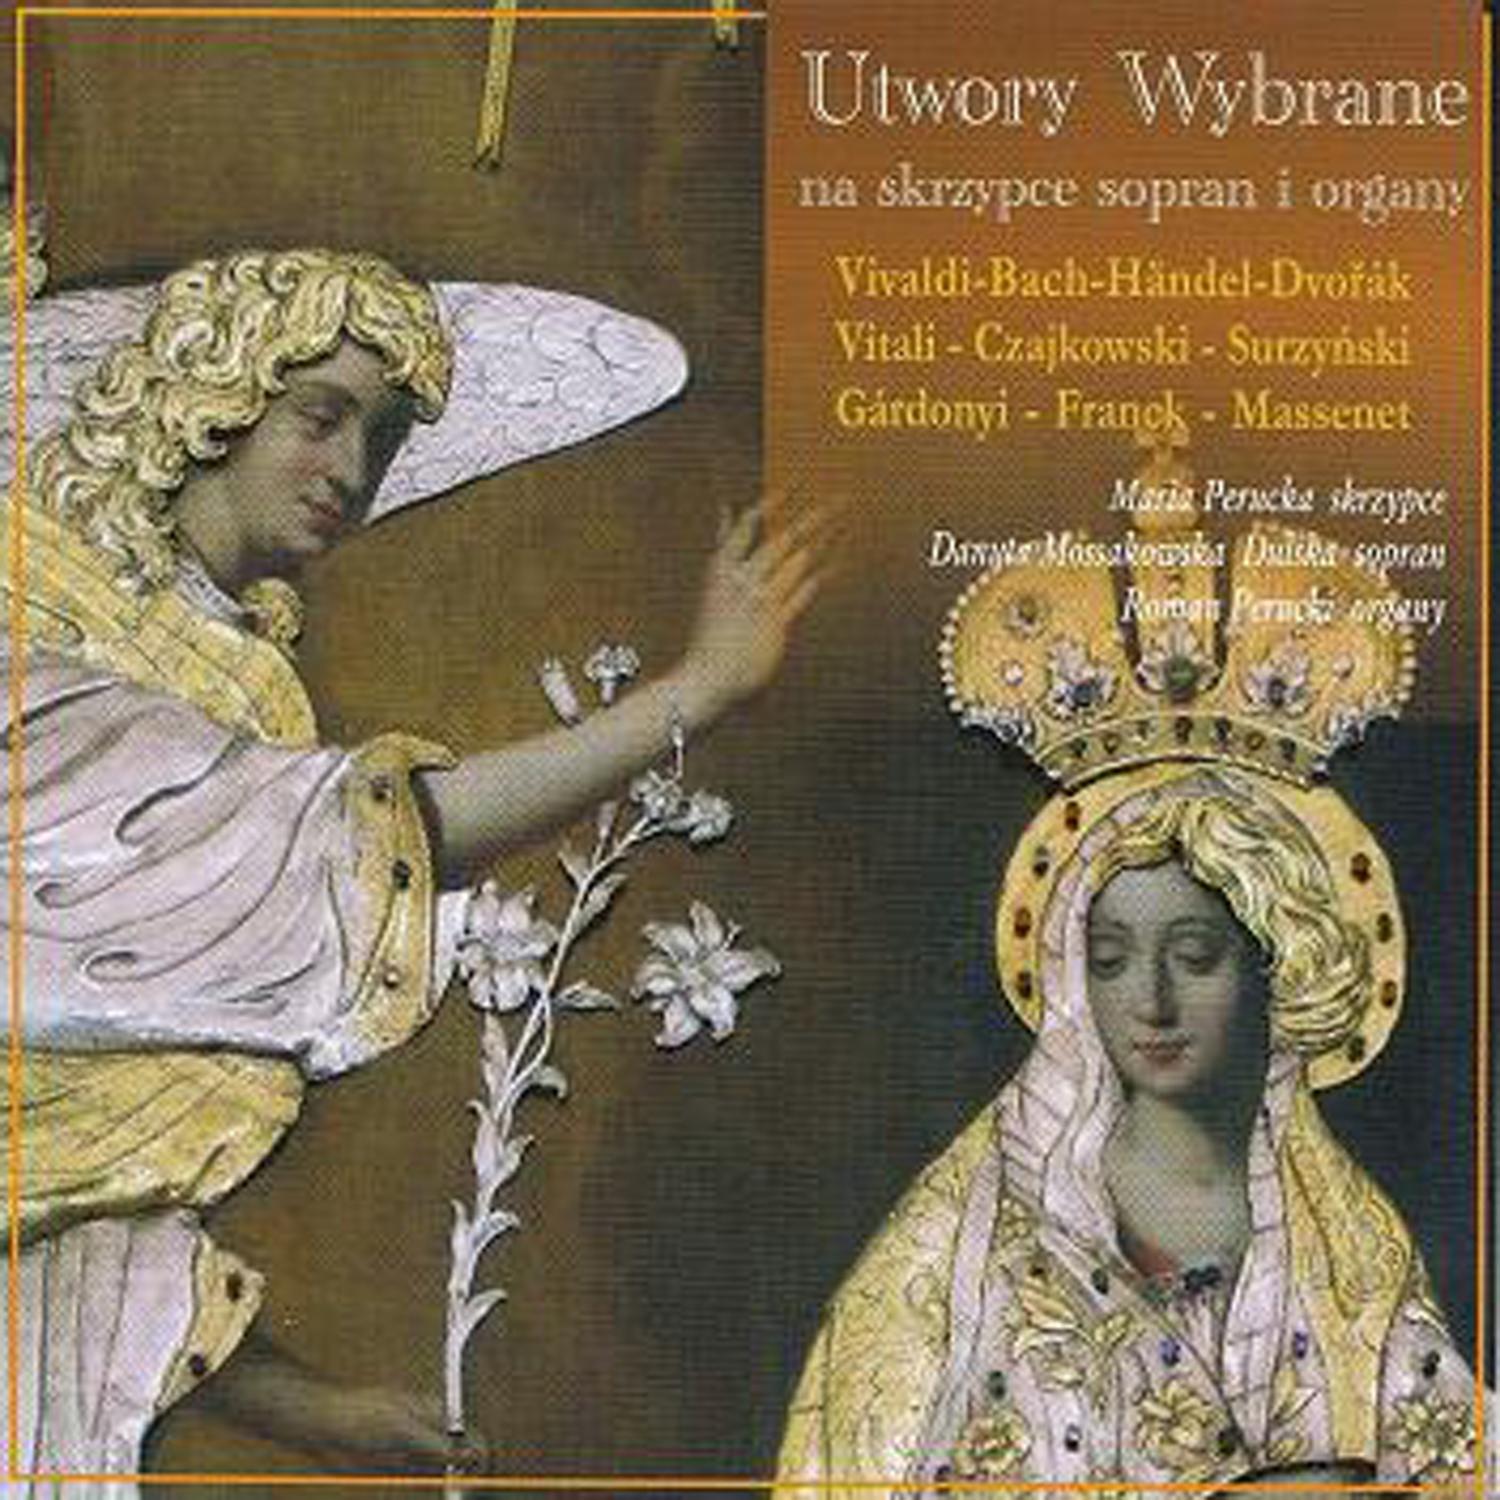 Selected Works for violin, soprano and organ